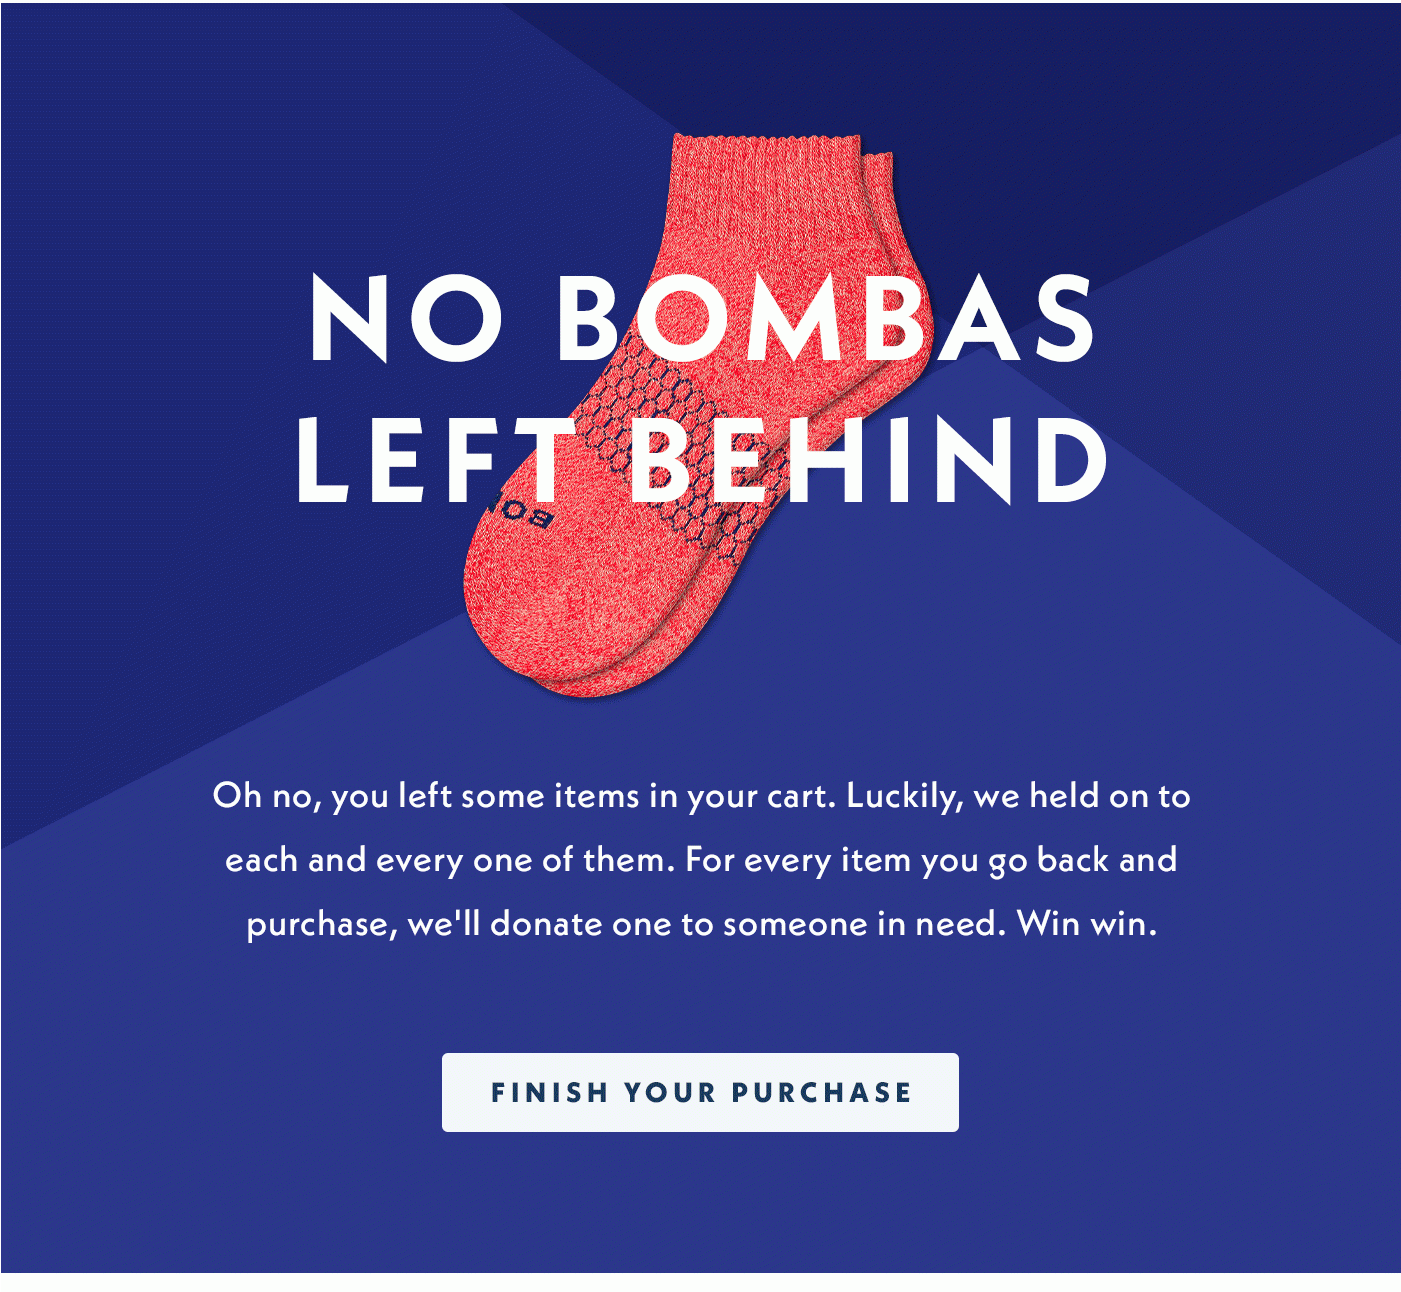 NO BOMBAS LEFT BEHIND | Oh no, you left some items in your cart. Luckily, we held on to each and every one of them. For every item you go back and purchase, we'll donate to someone in need. Win win.